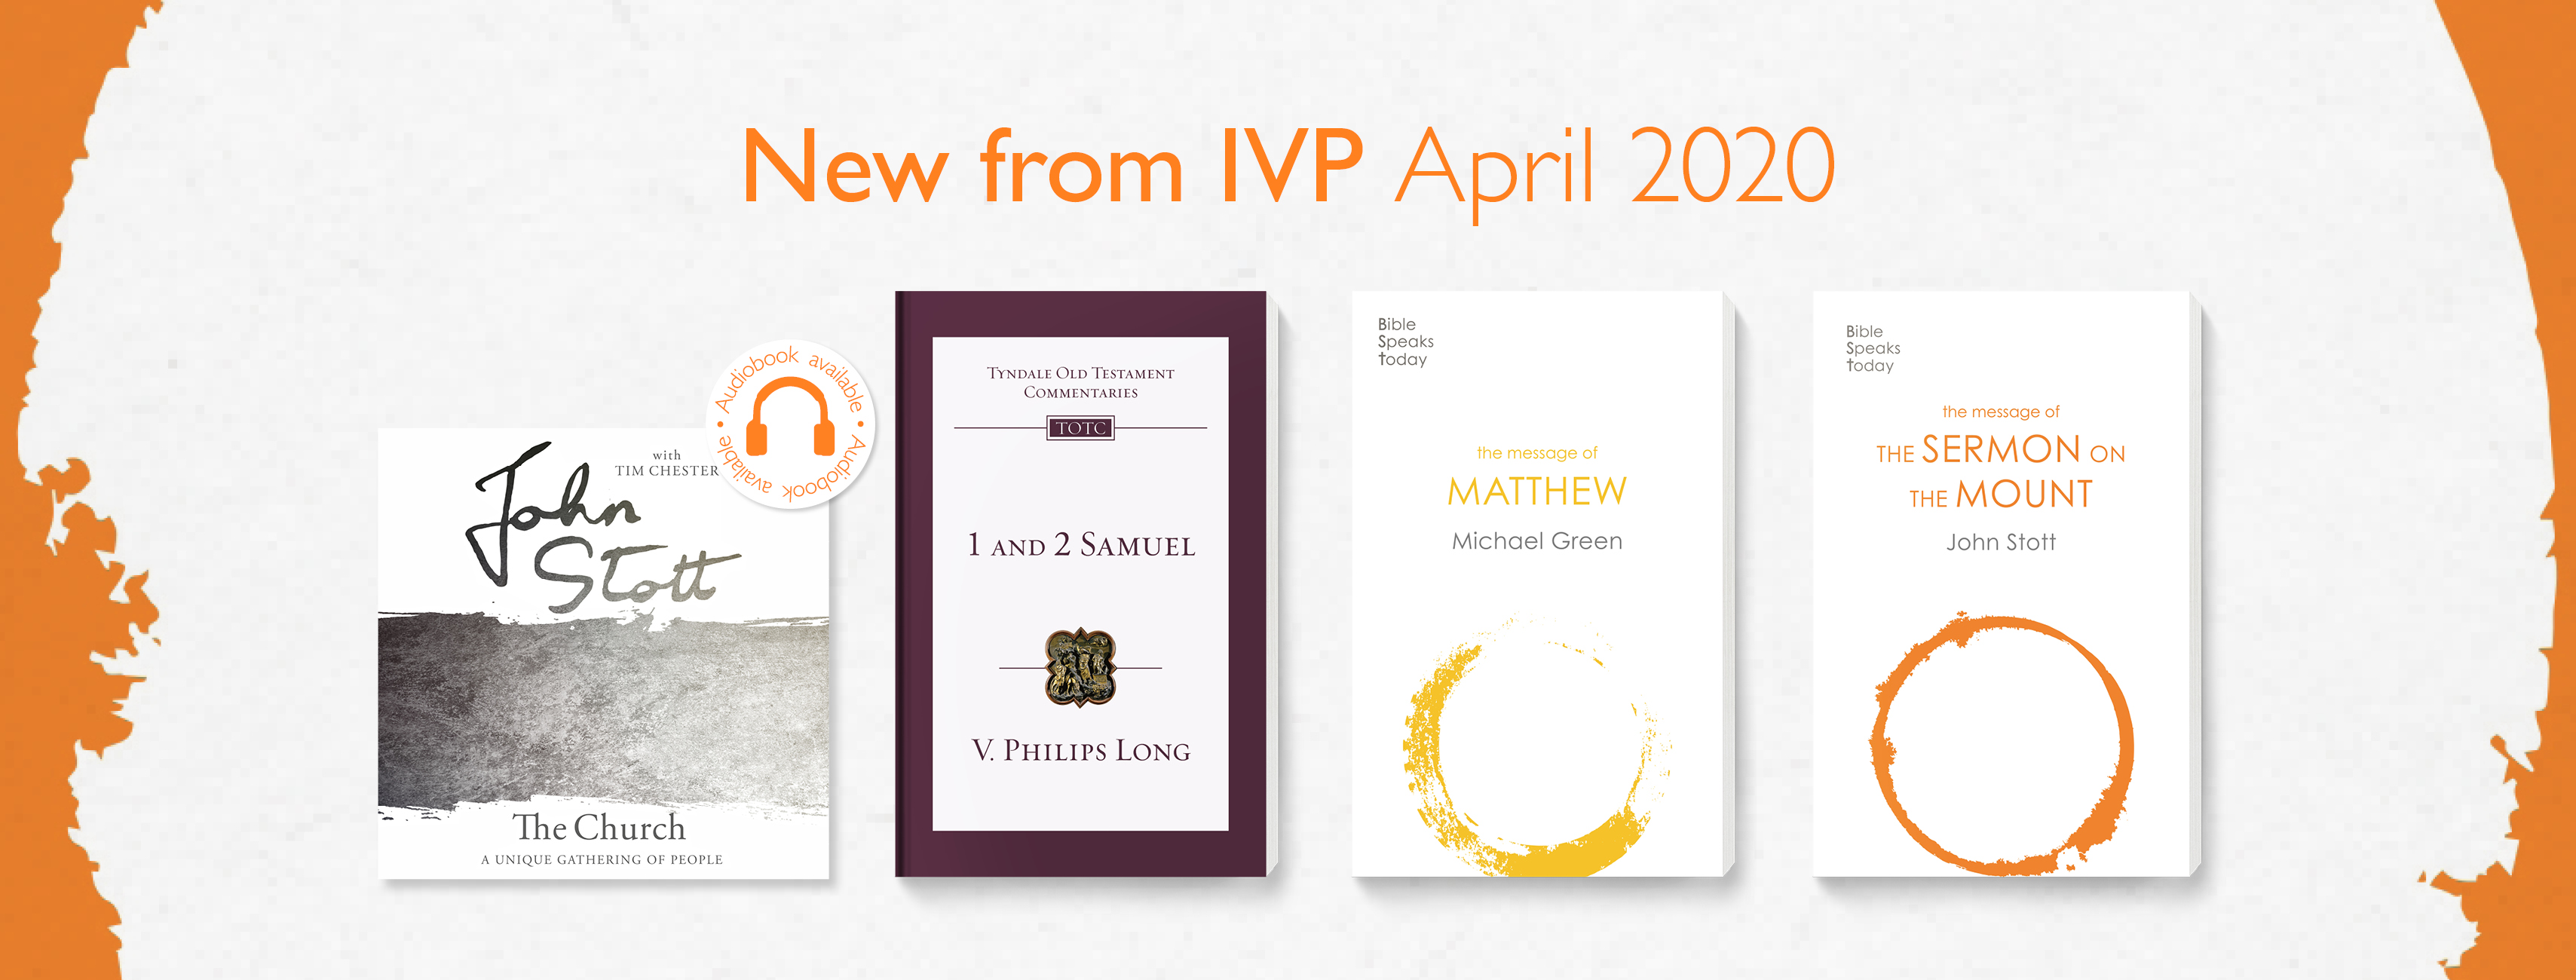 The IVP April 2020 Releases